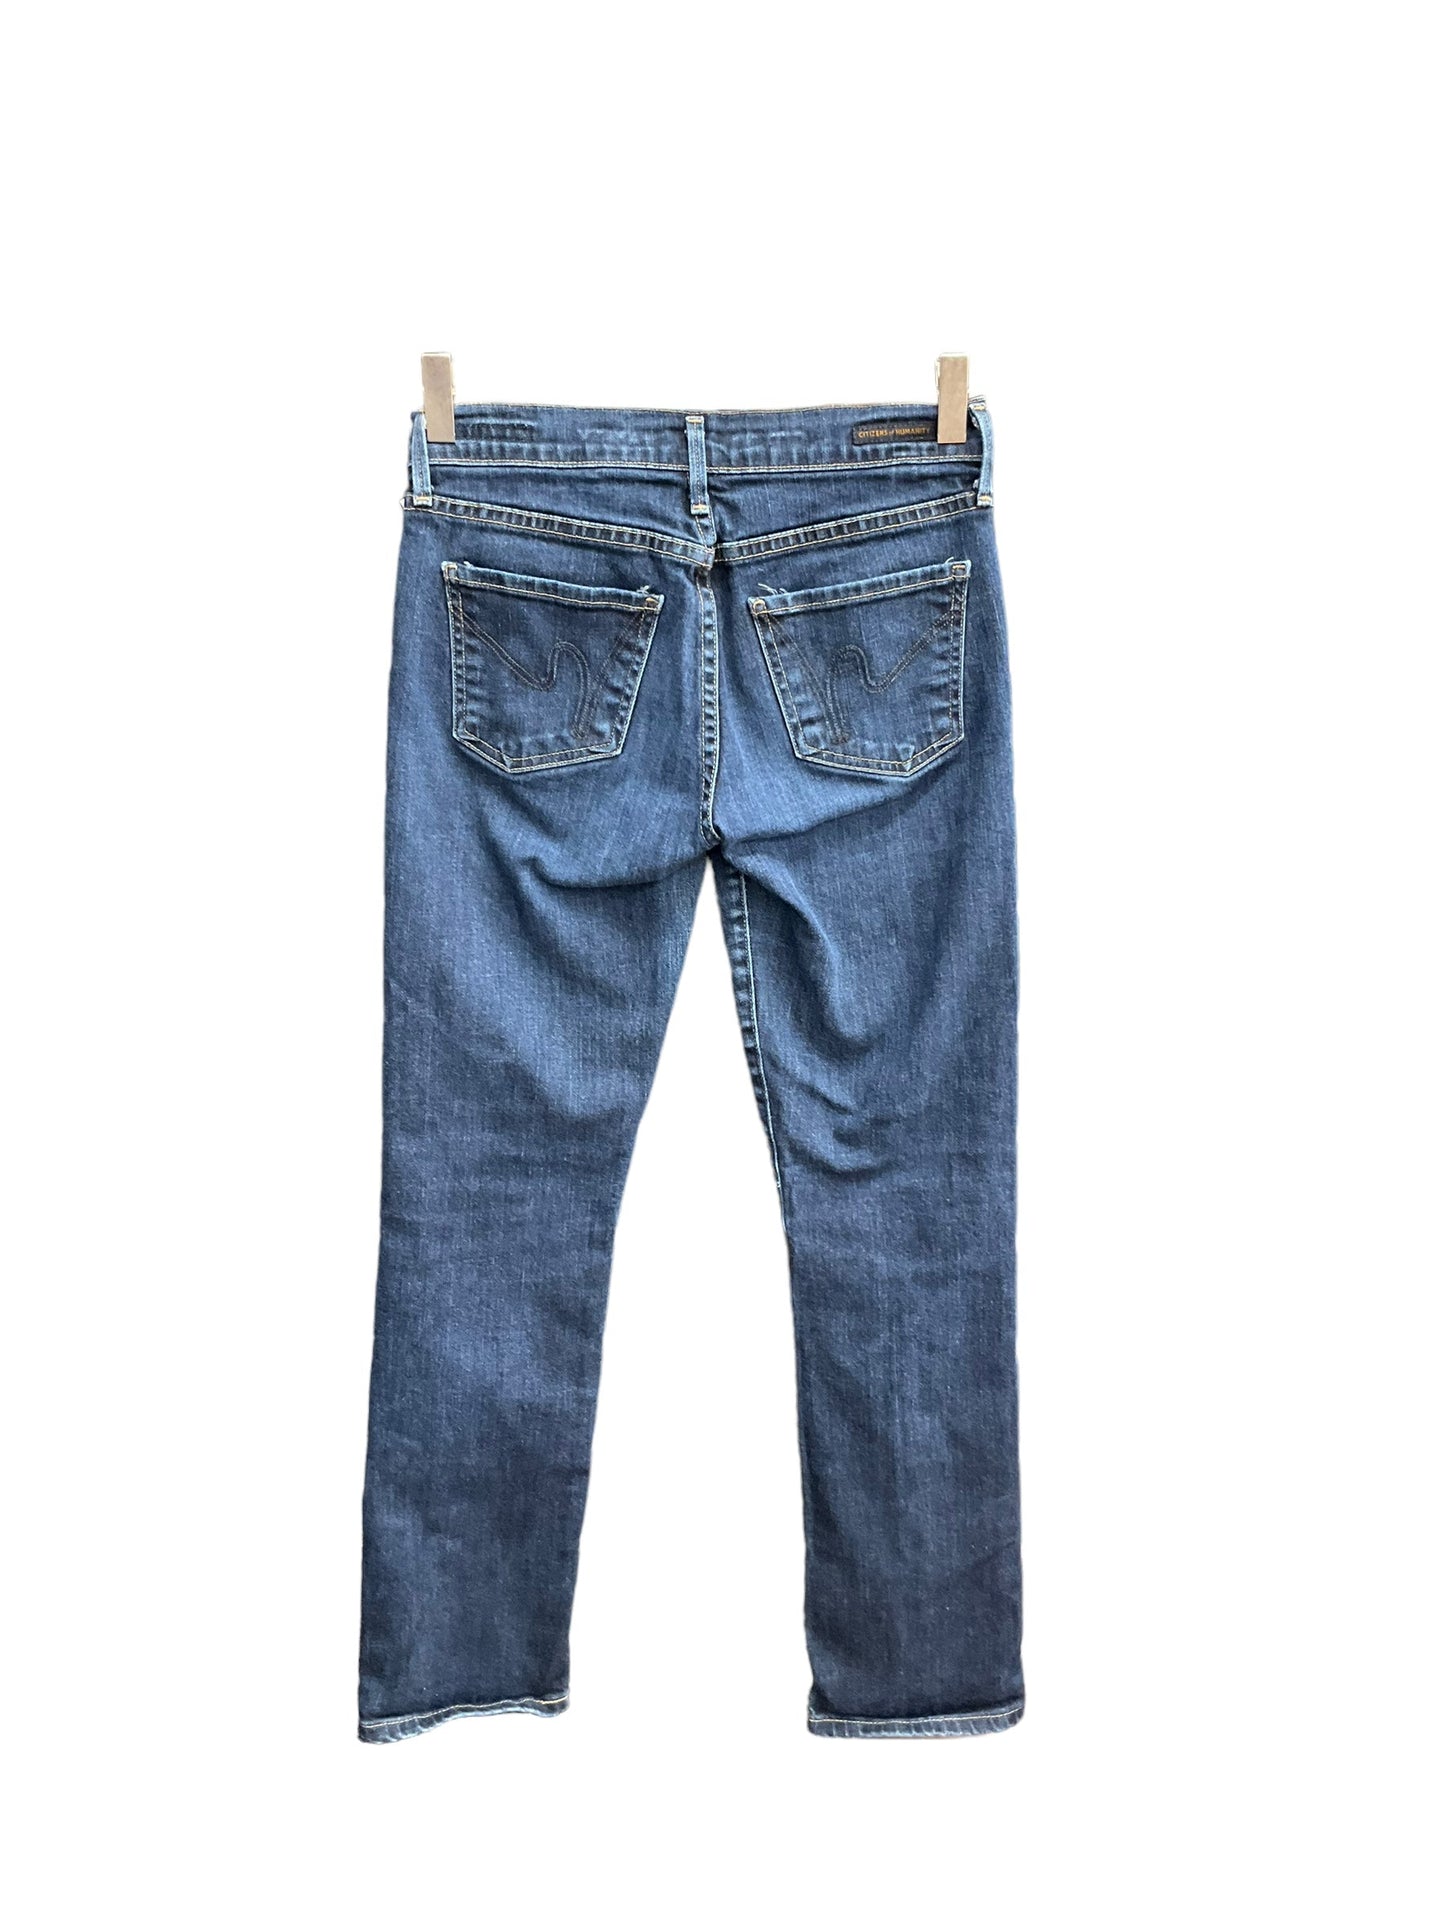 Jeans Straight By Citizens Of Humanity  Size: 0